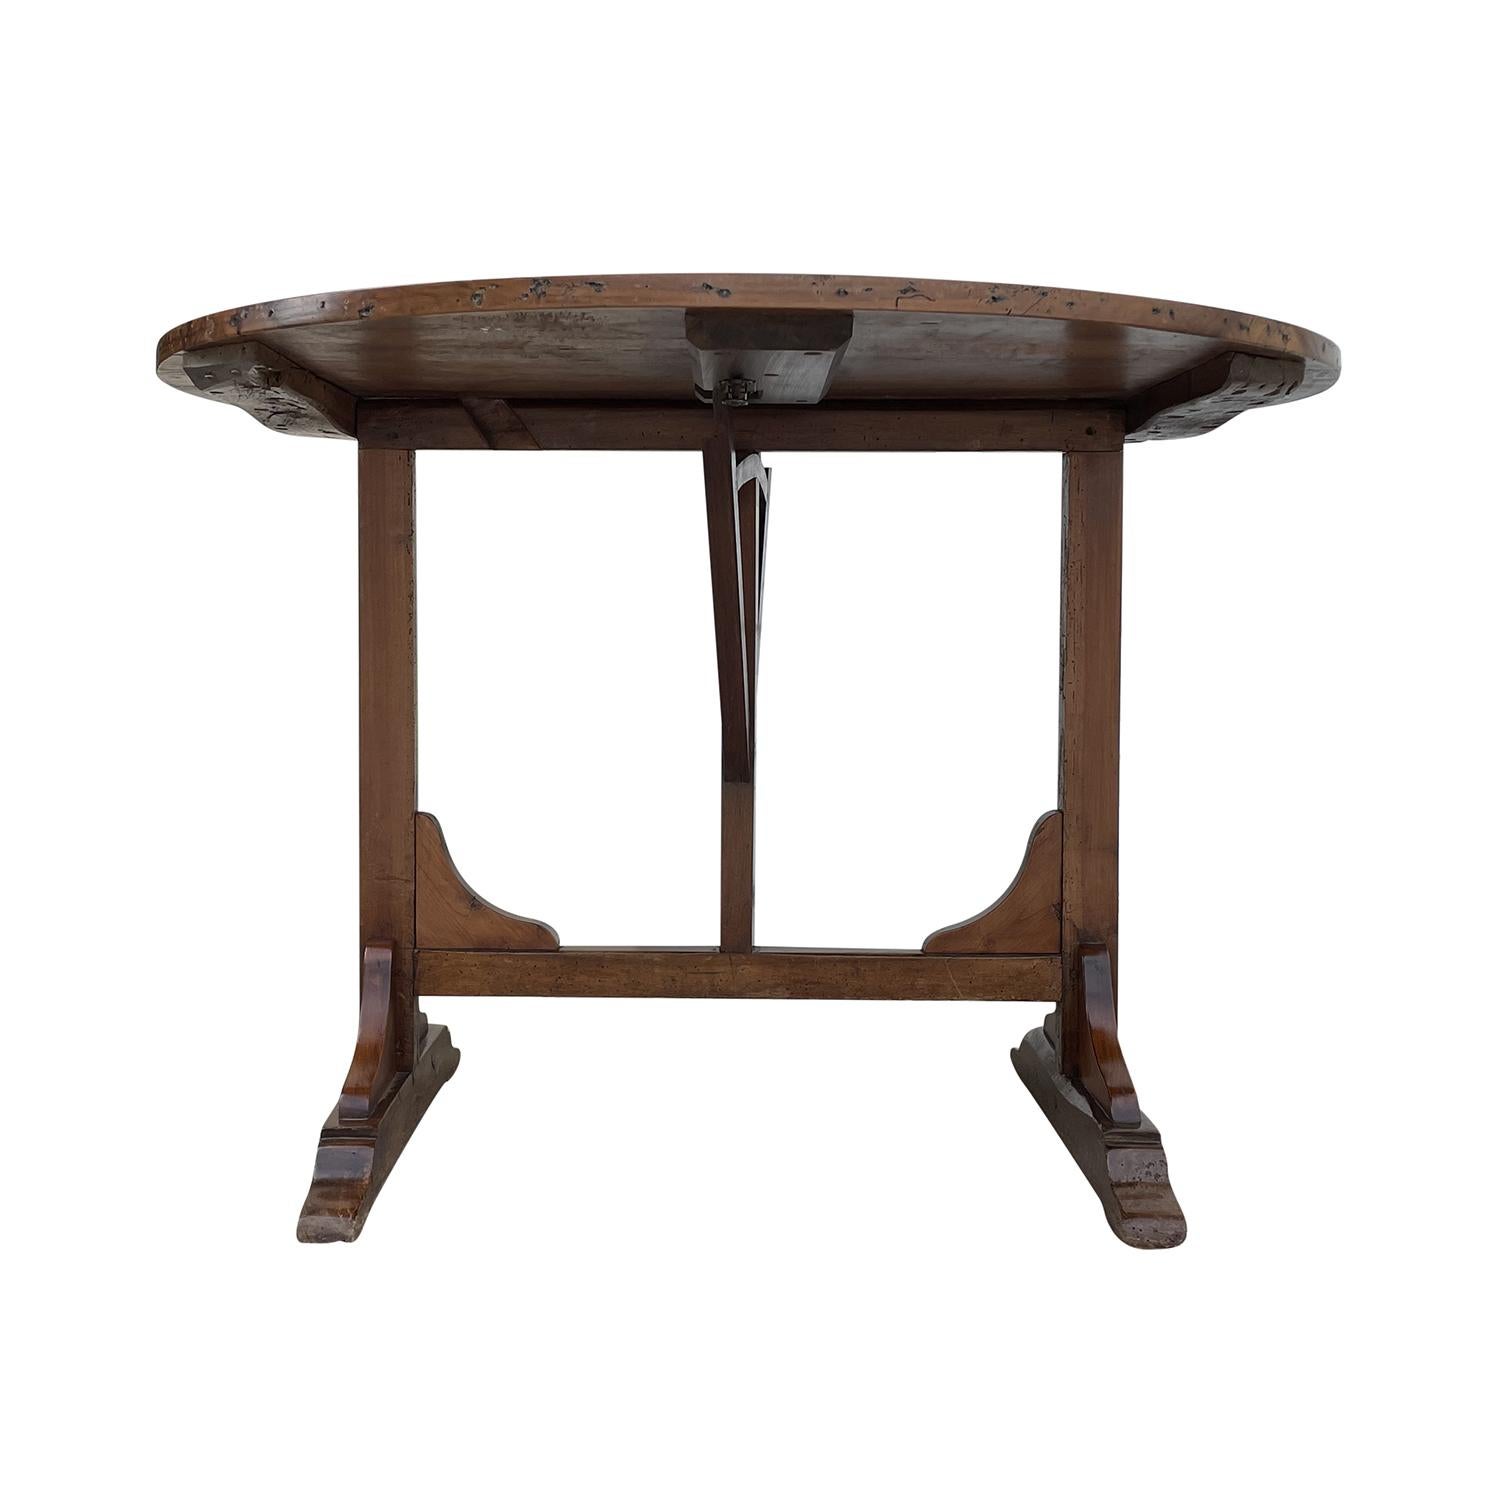 A small, antique round French Provencal folding wine, center table made of hand crafted Walnut, in good condition. The Vigneron tables are used in France as occasional tables in wine cellars. Wear consistent with age and use. Circa 1880, France.